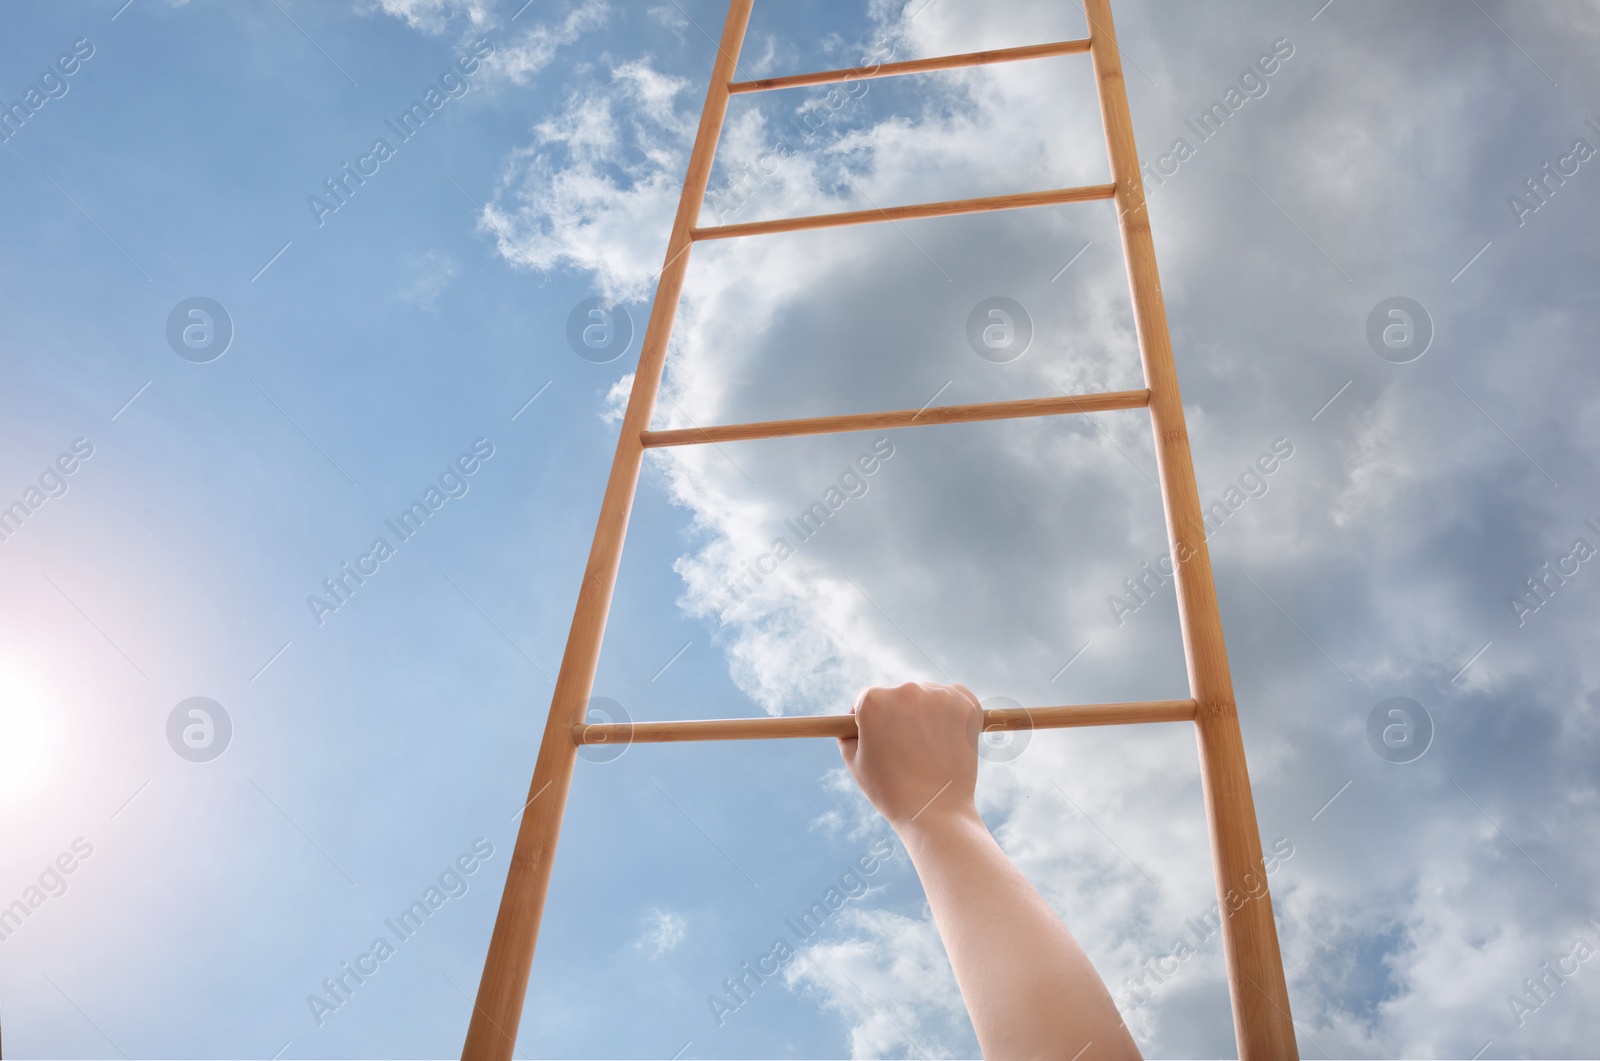 Image of Woman climbing up wooden ladder against blue sky with clouds, closeup